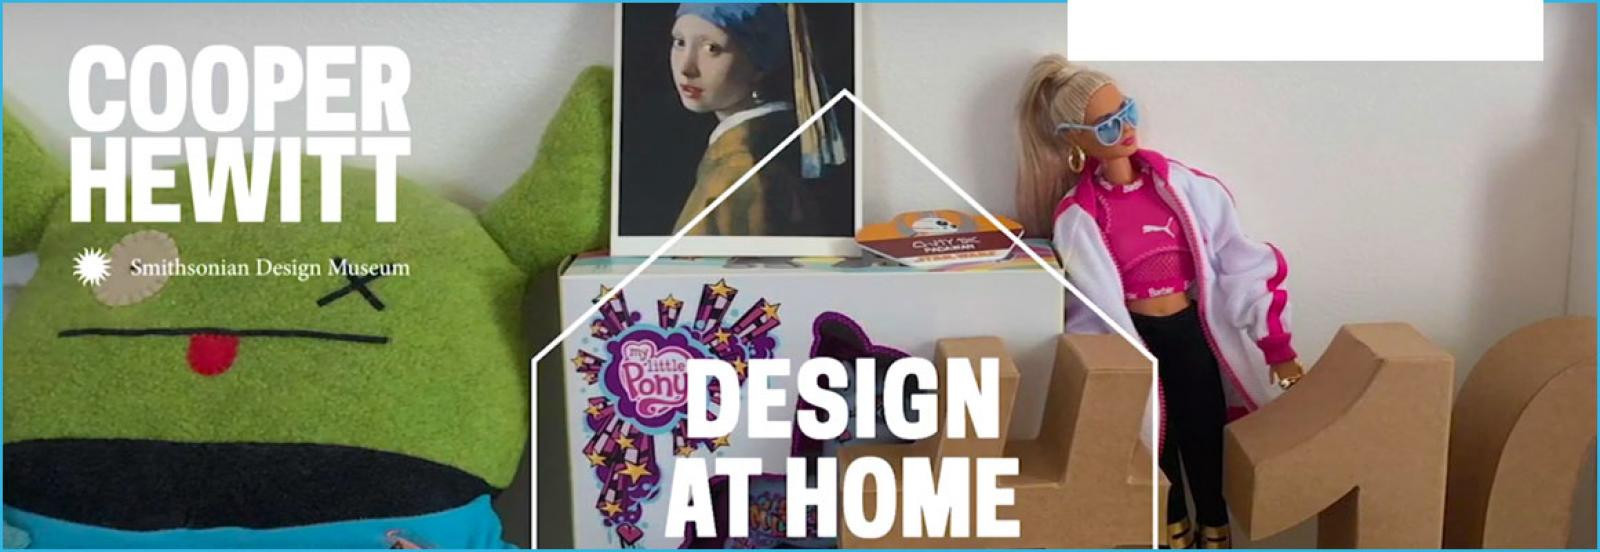 Clickable image of the Cooper Hewitt Design at Home feature.